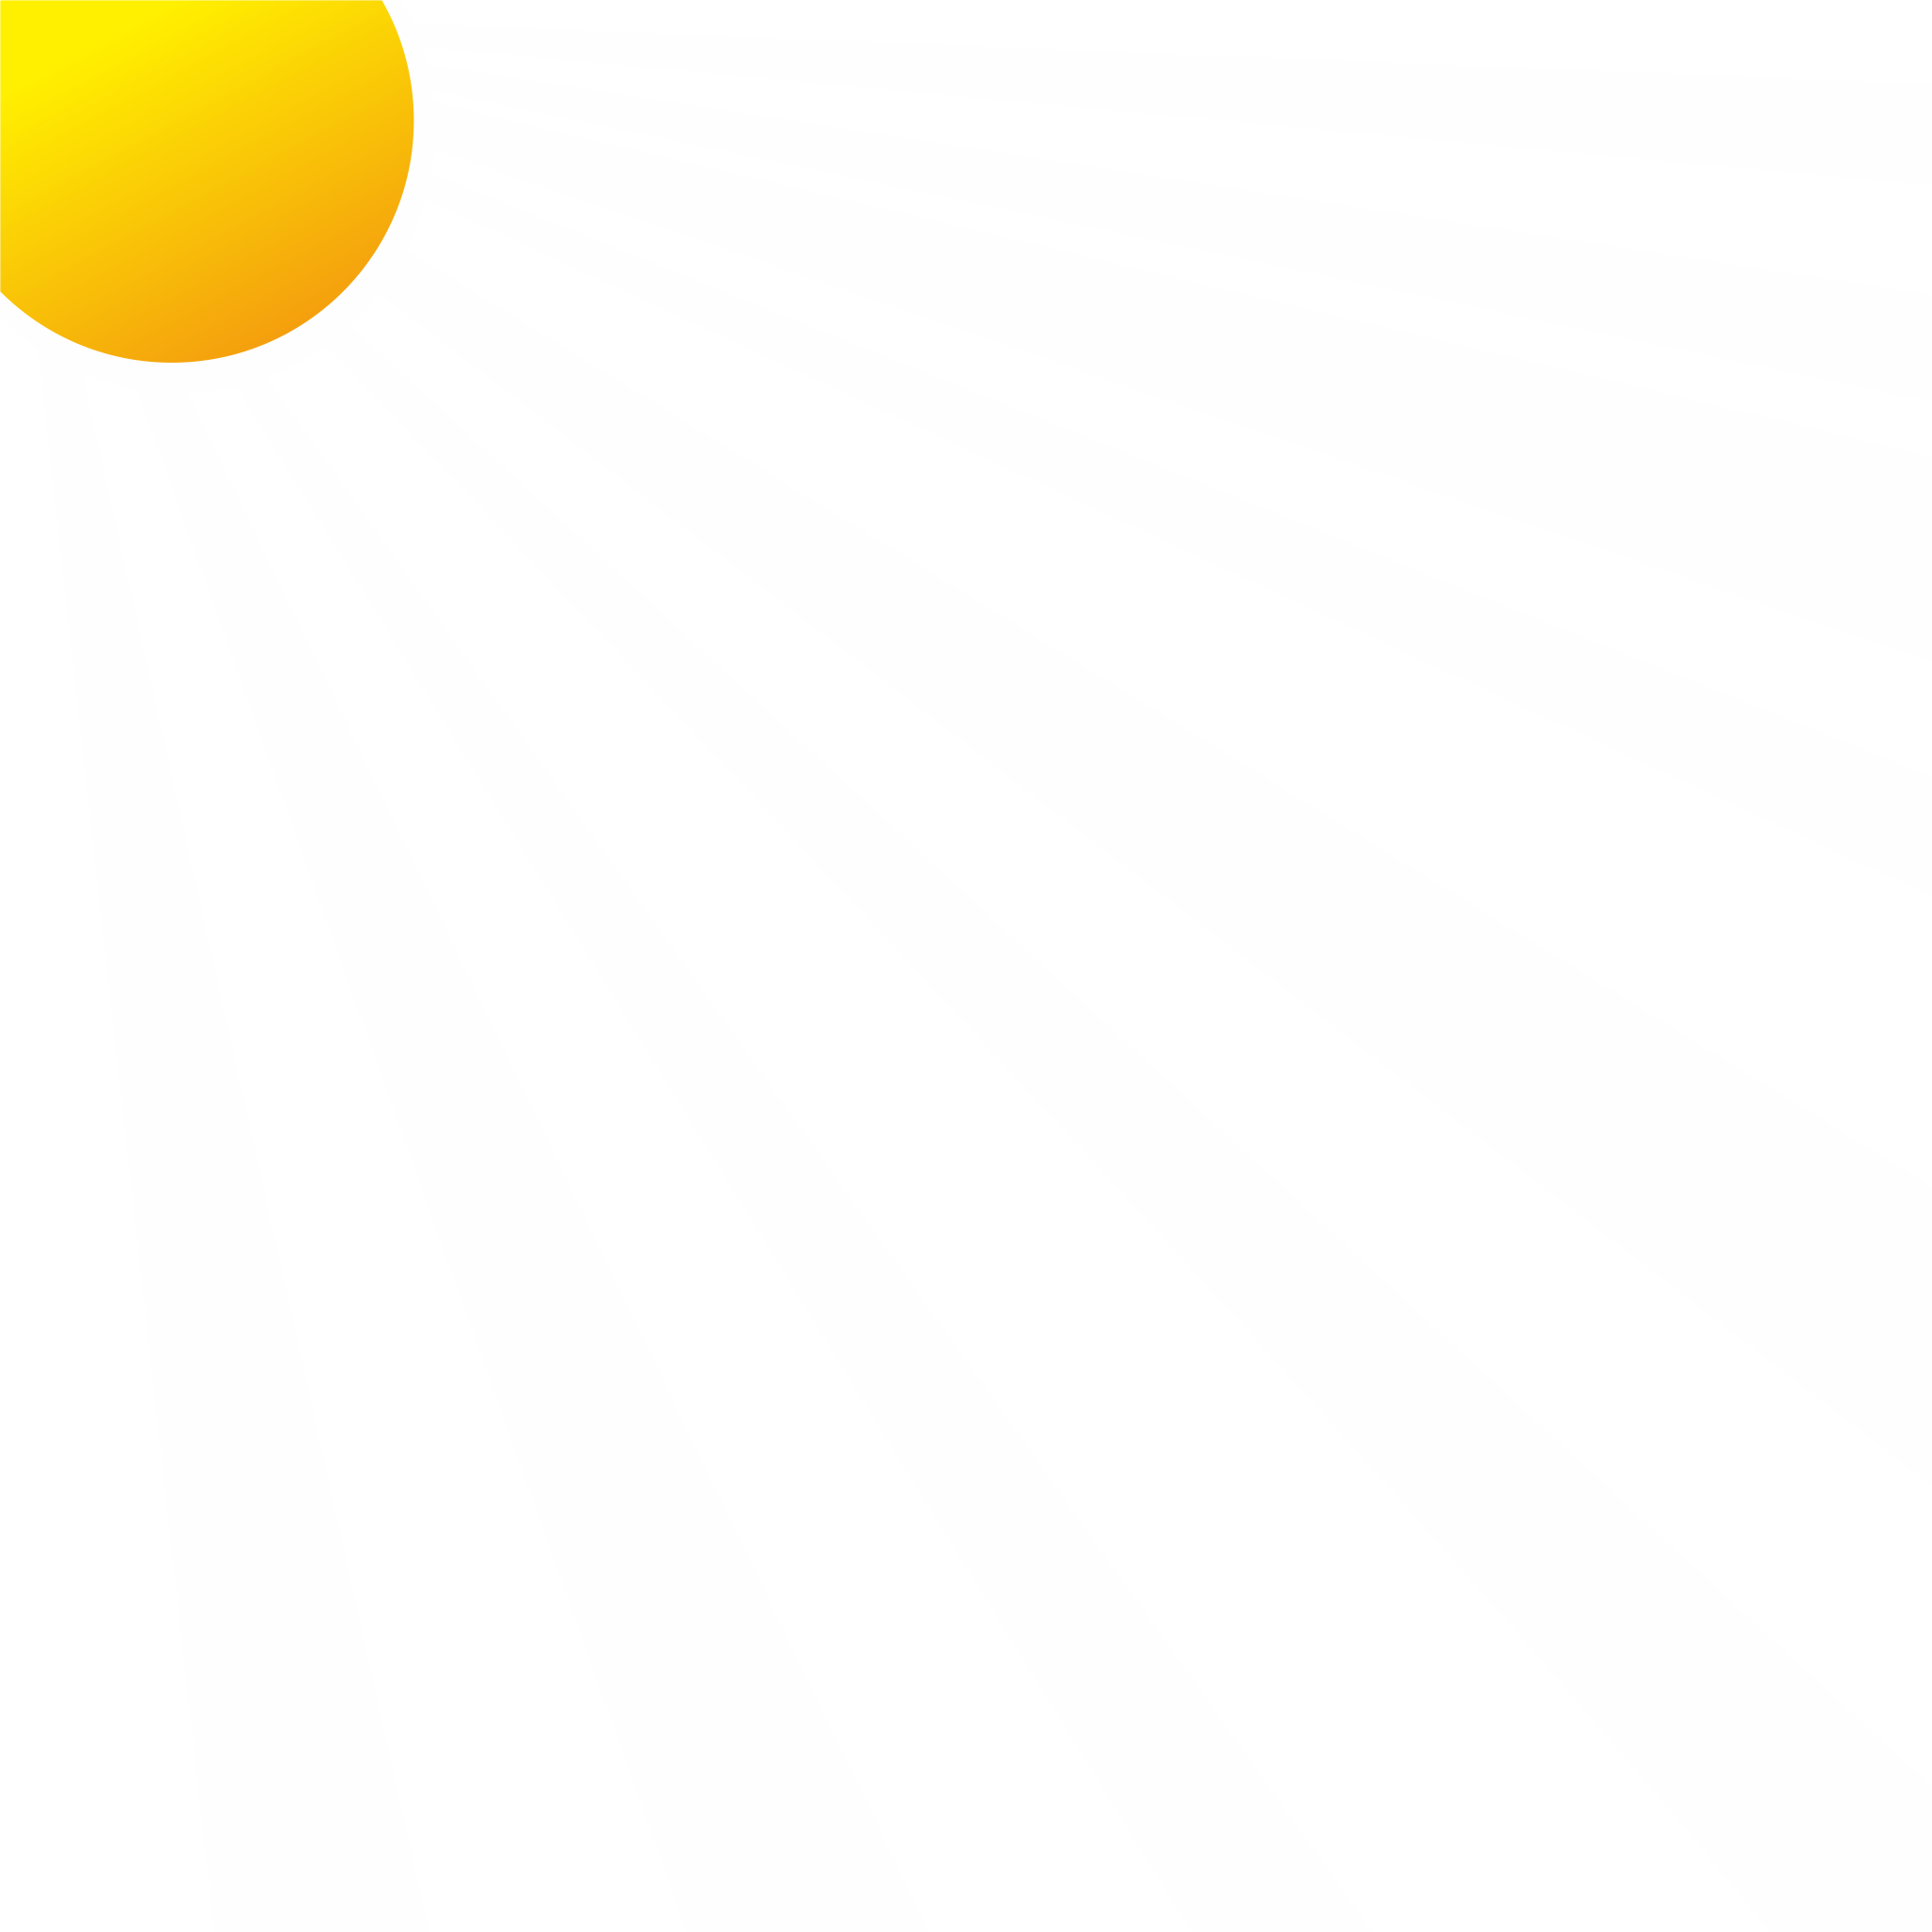 sun rays clipart black and white